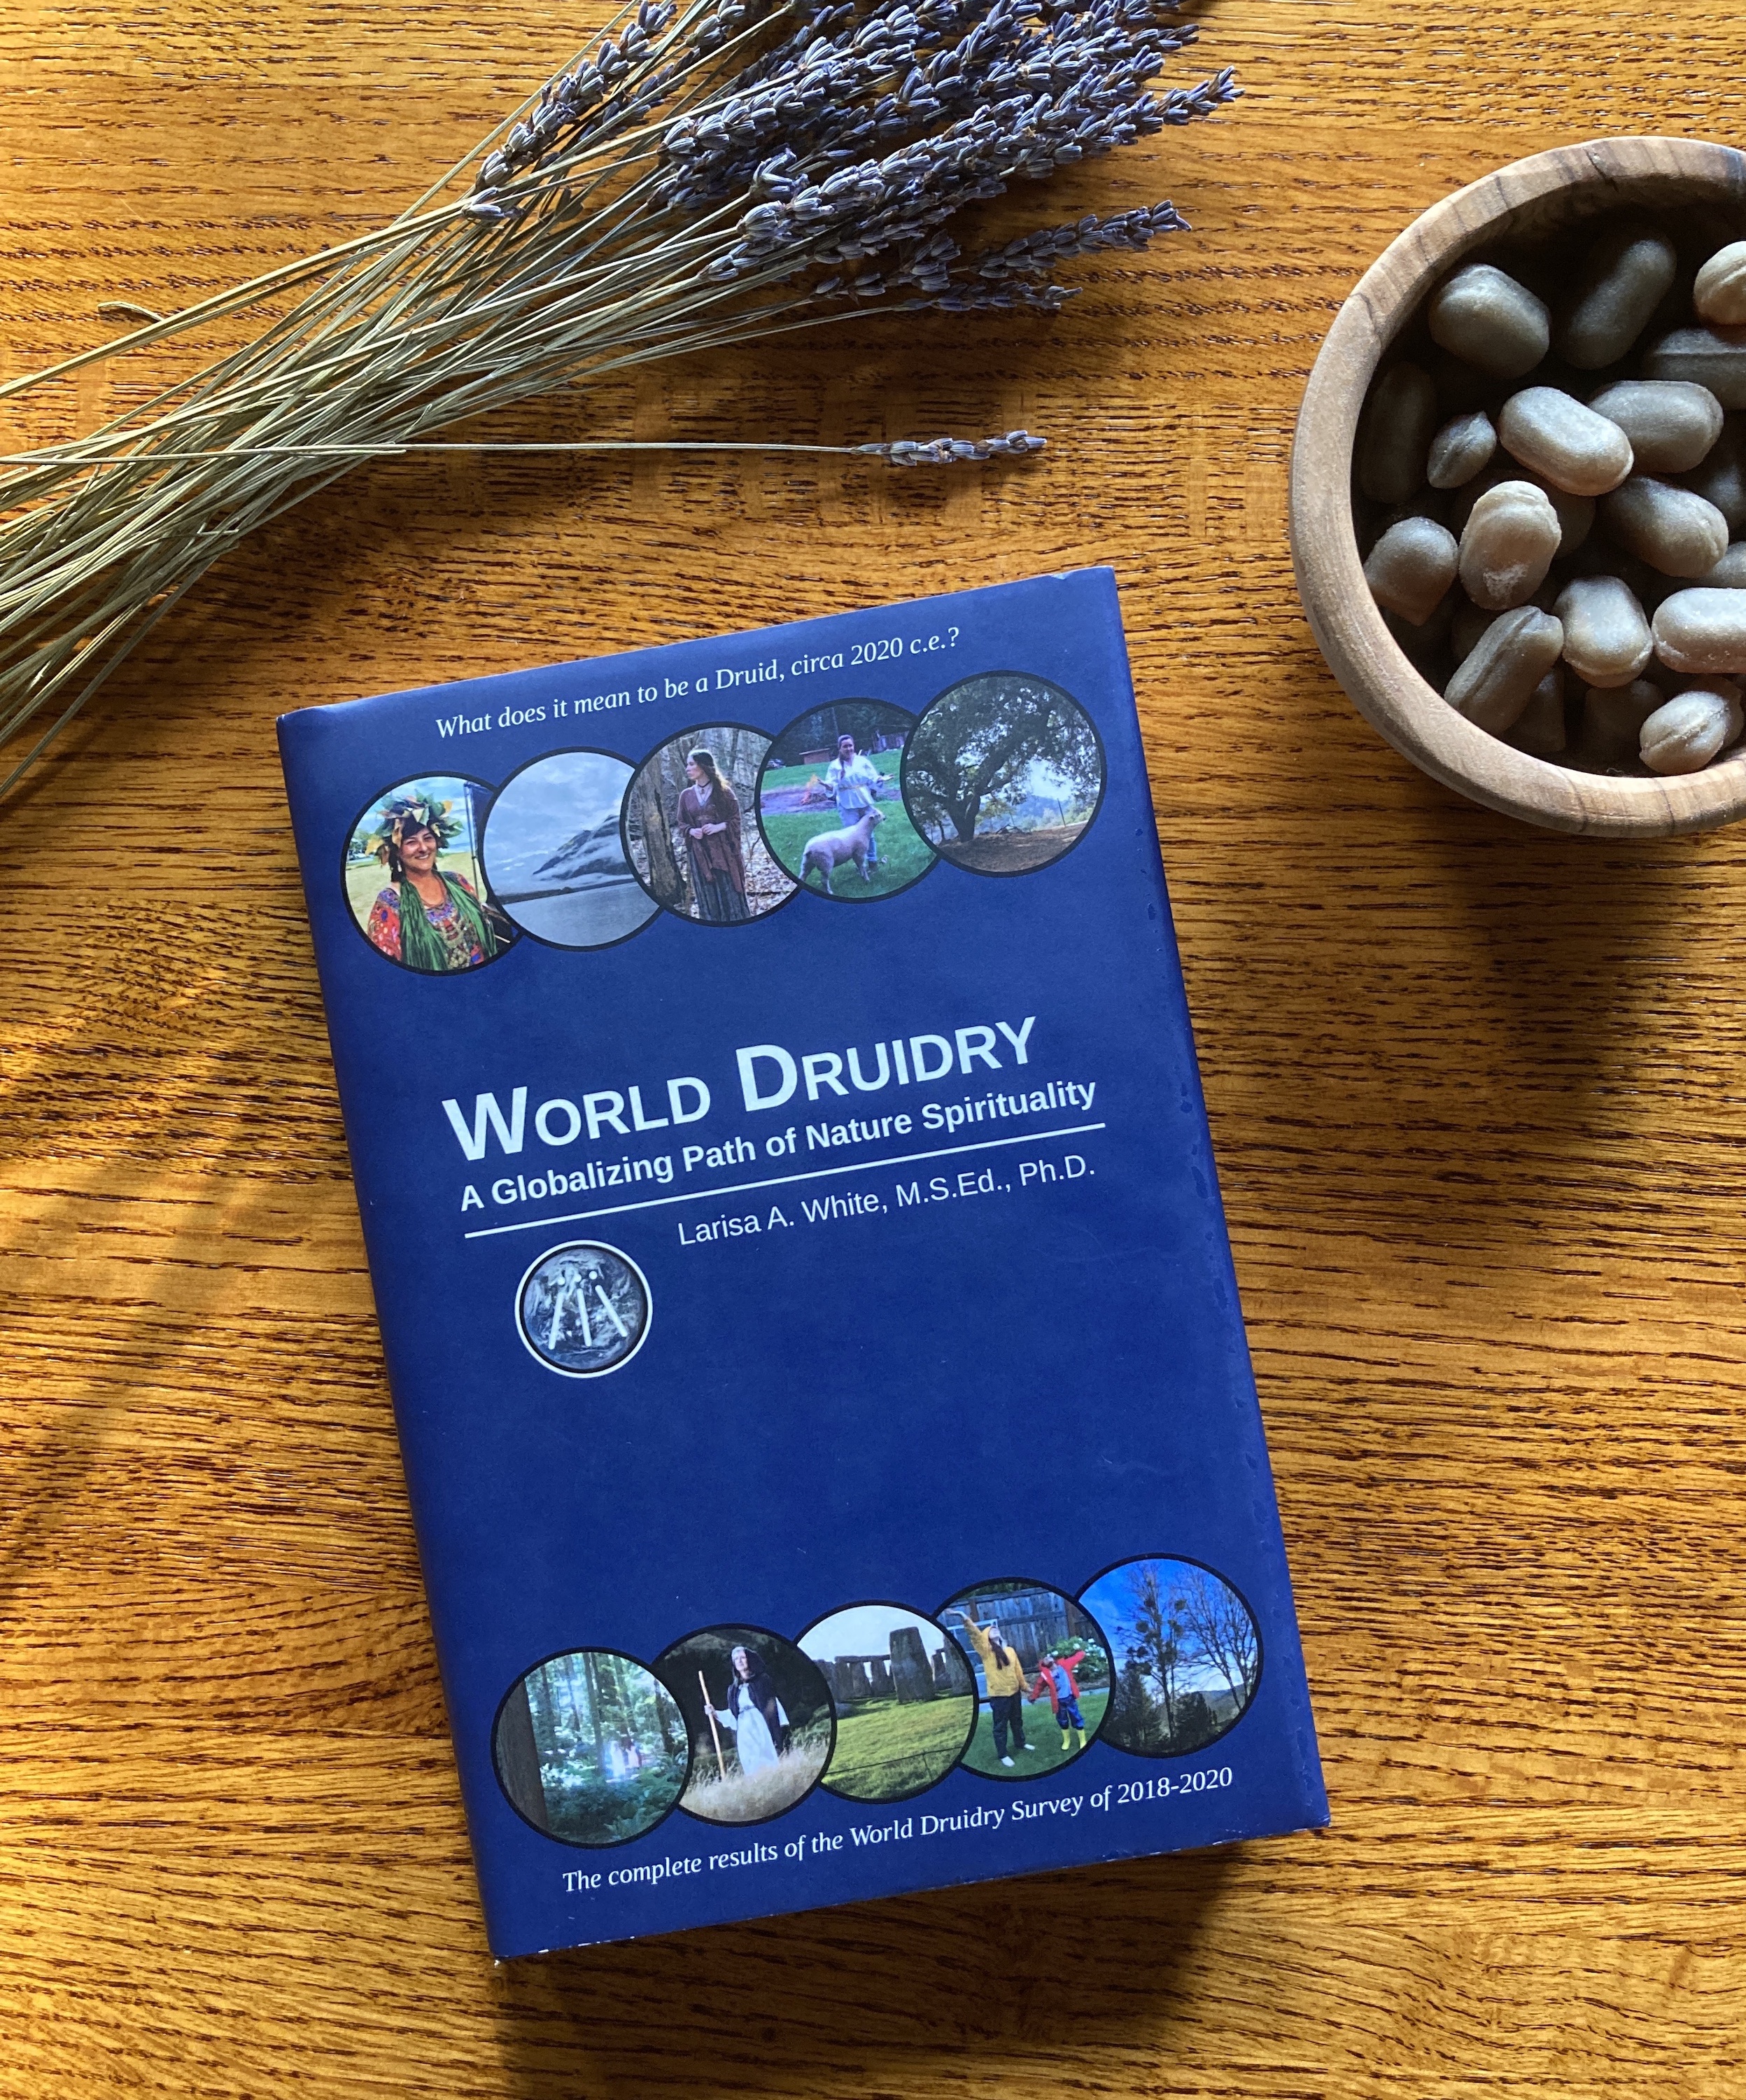 World Druidry book cover